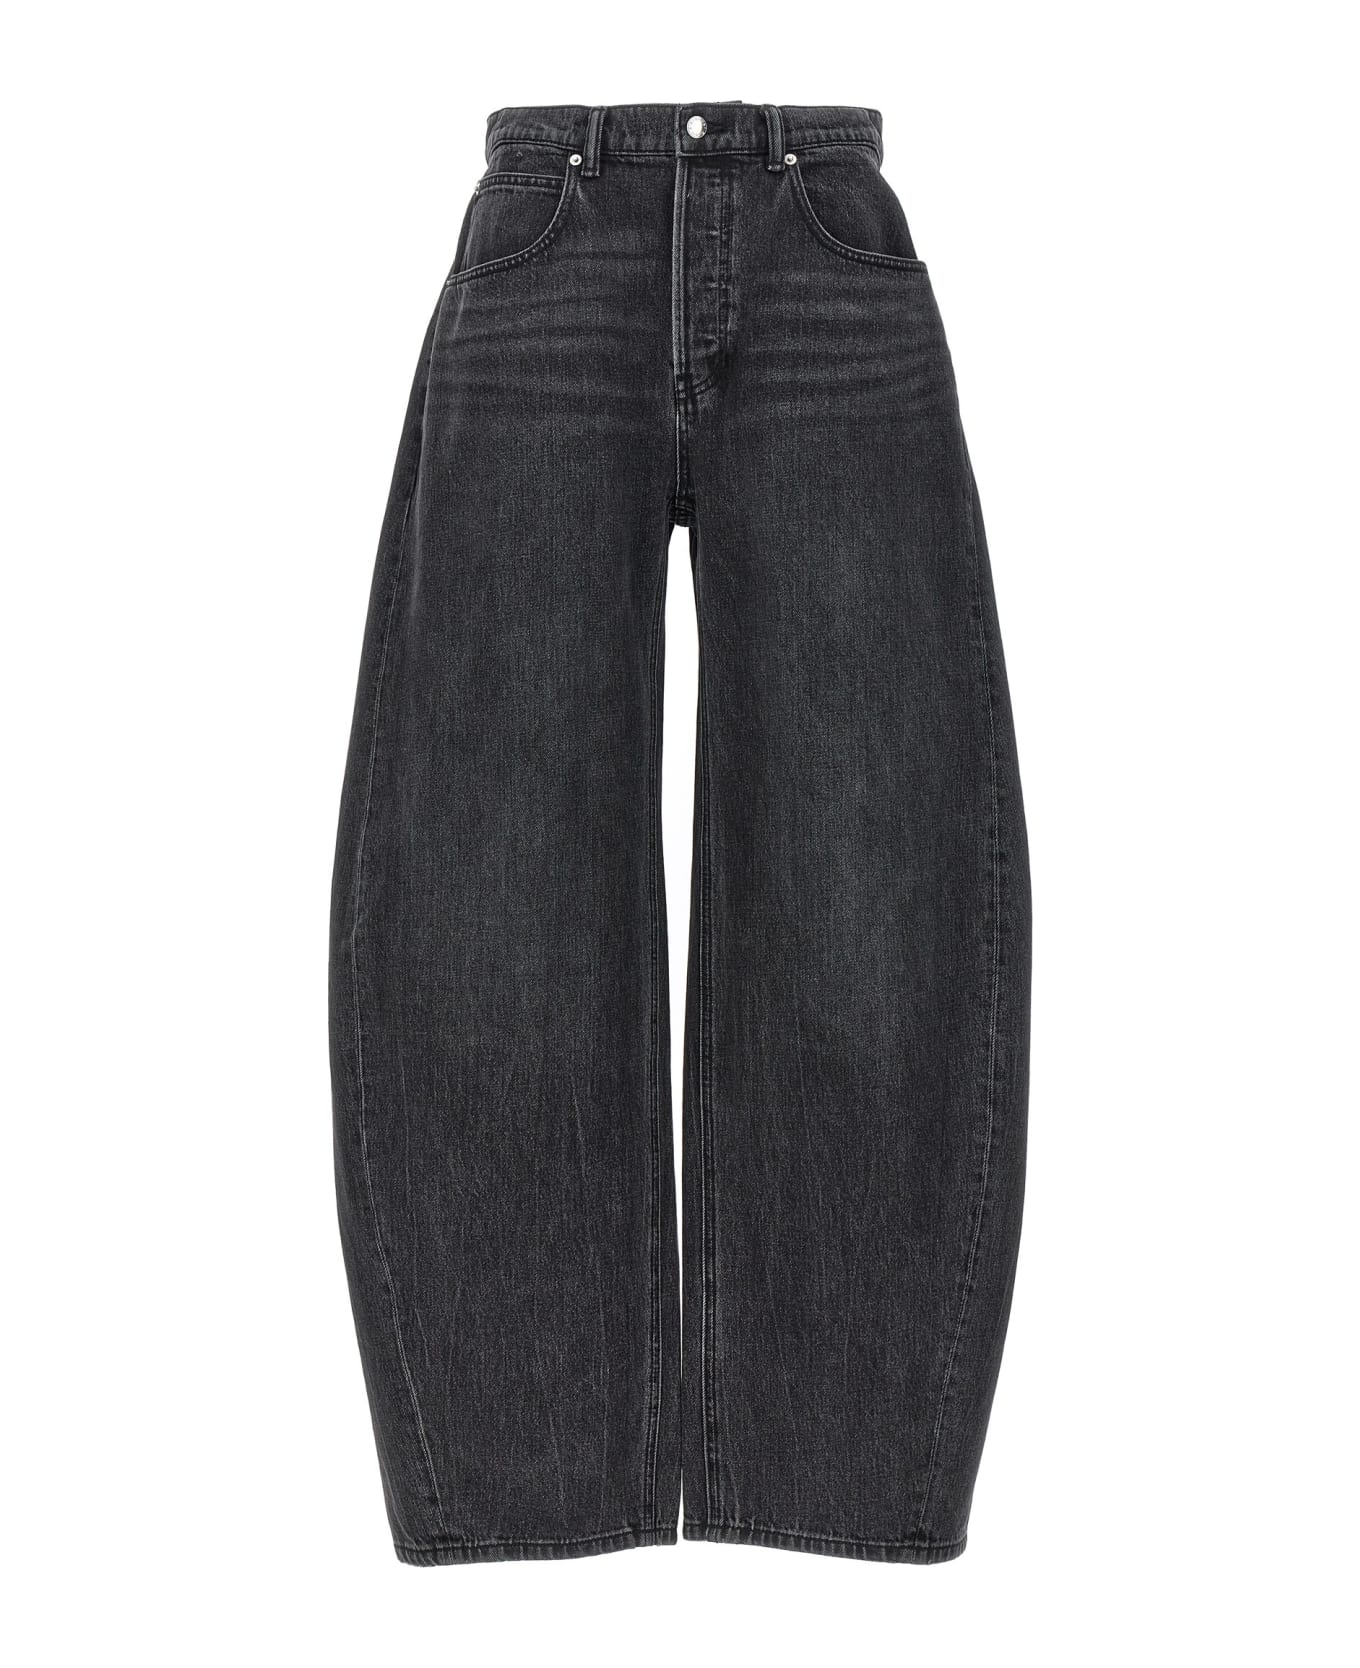 Alexander Wang 'oversized Rounded' Jeans - Grey Aged